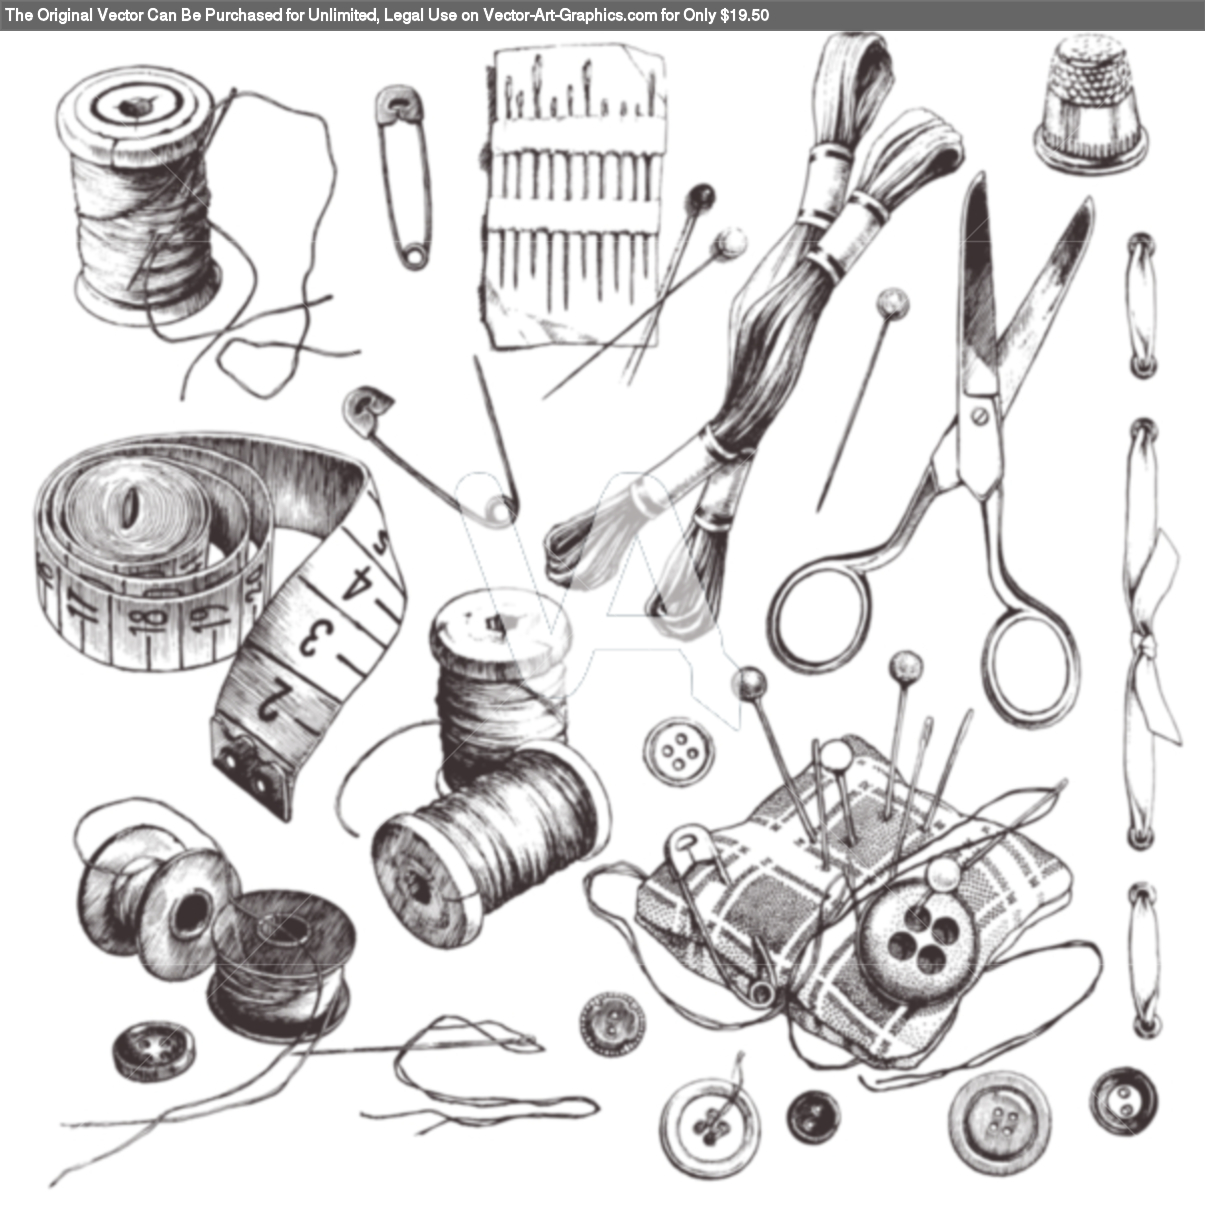      Of Highly Detailed Hand Drawn Sewing And Knitting Tools 1d39b64